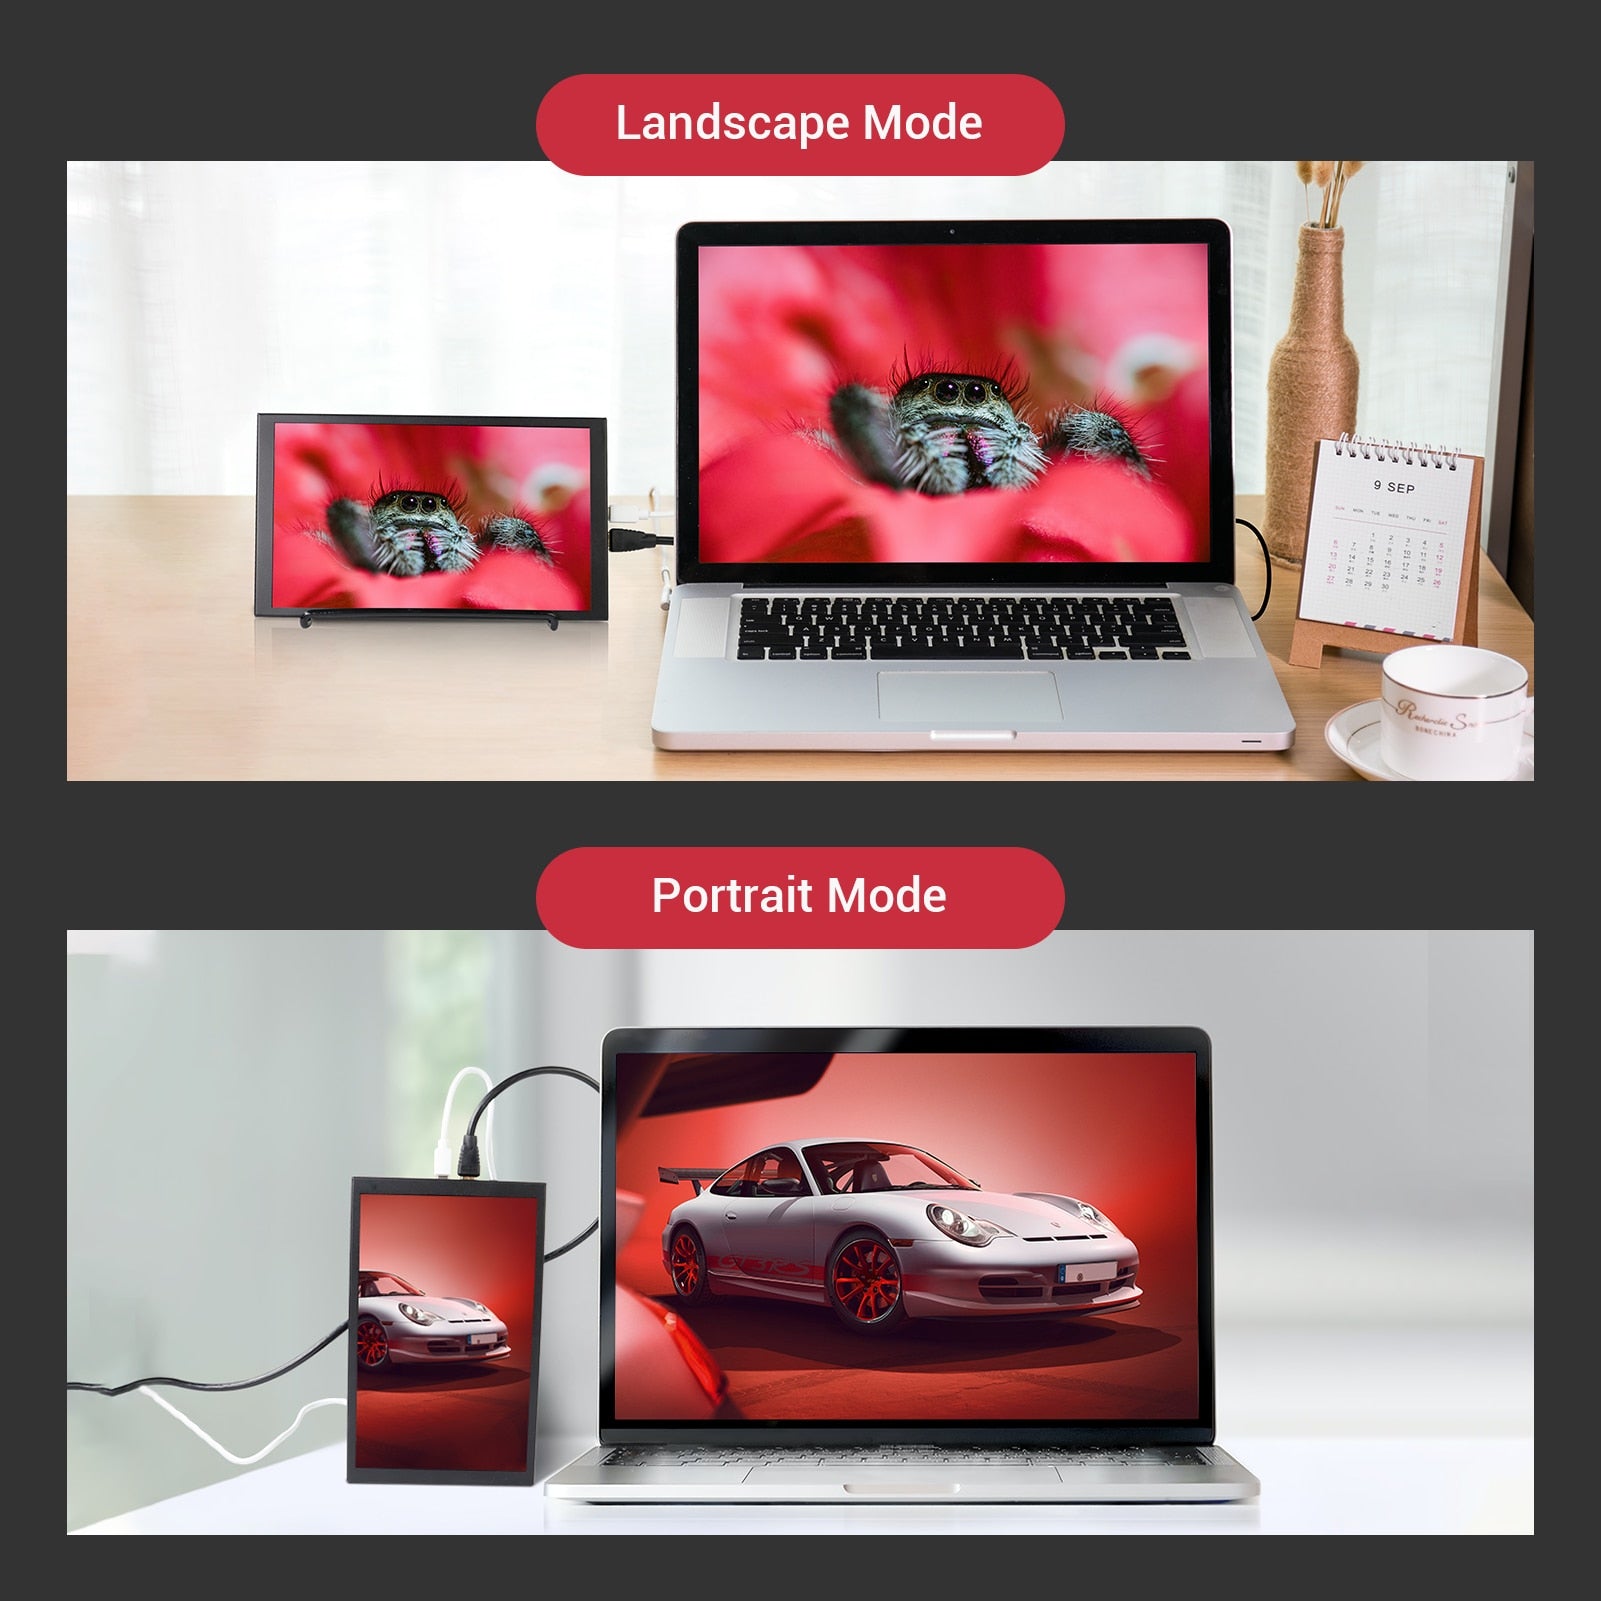 8 Inch Touchscreen Monitor HDMI-compatible Portable LCD Display 1280x800 Built in with Laptop PC Raspberry Pi Game Consoles